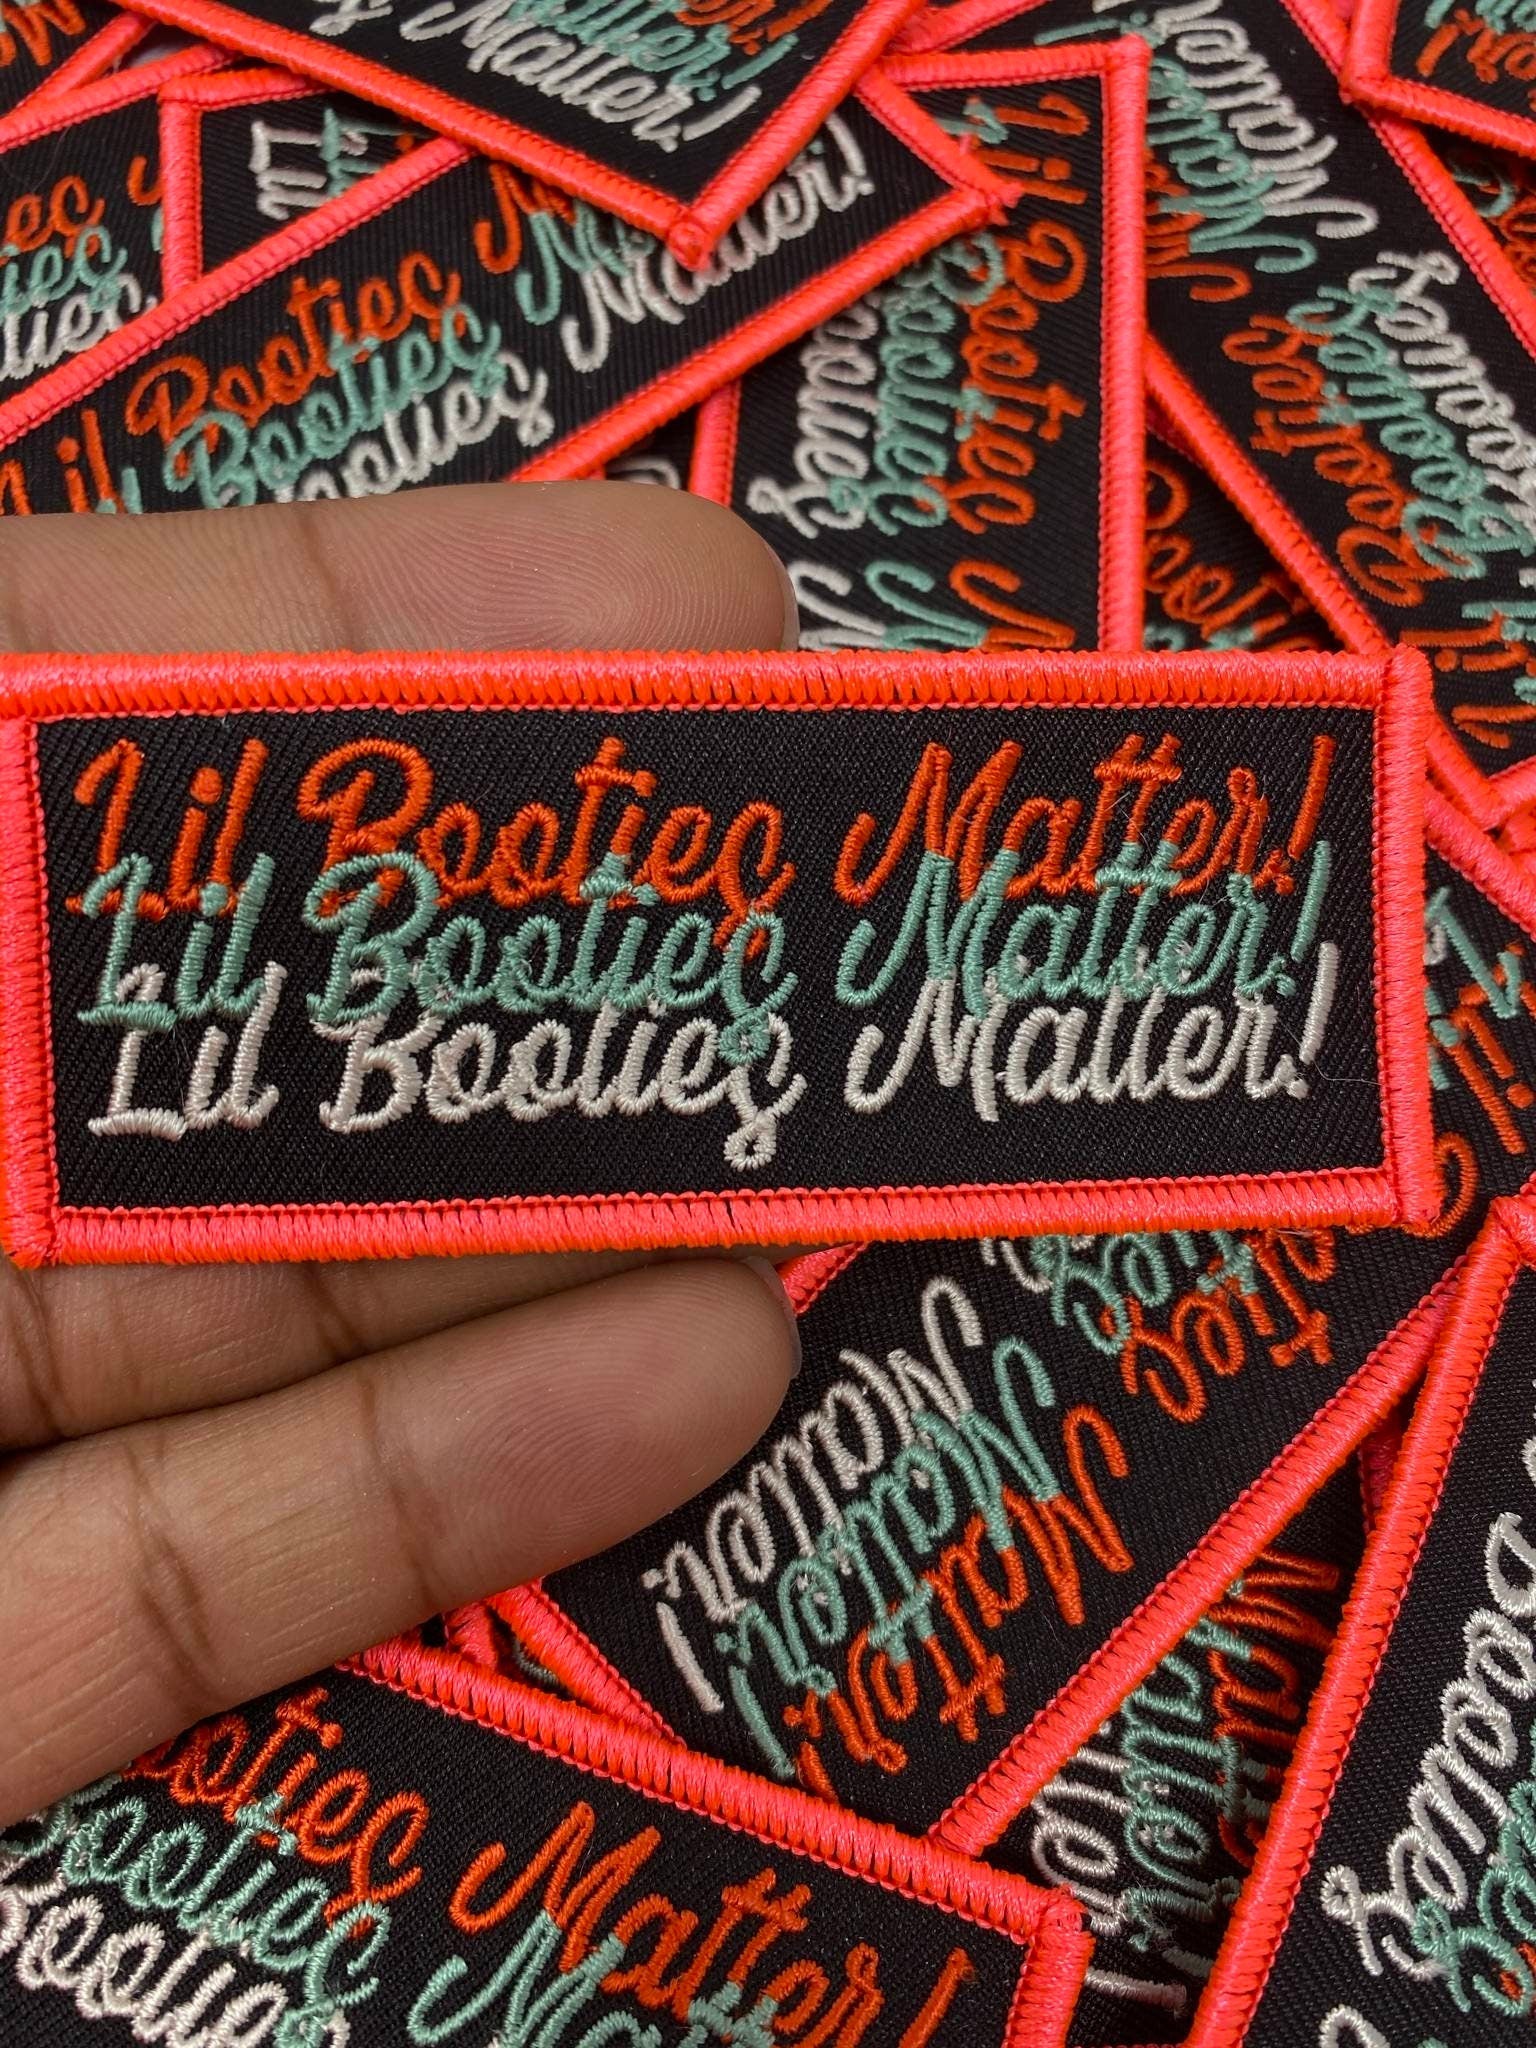 Exclusive, NEON, Lil Booties Matter, Colorful Statement Patch, 3"x2" inch,  Cool Applique For Clothing, Iron-on Embroidered Patch